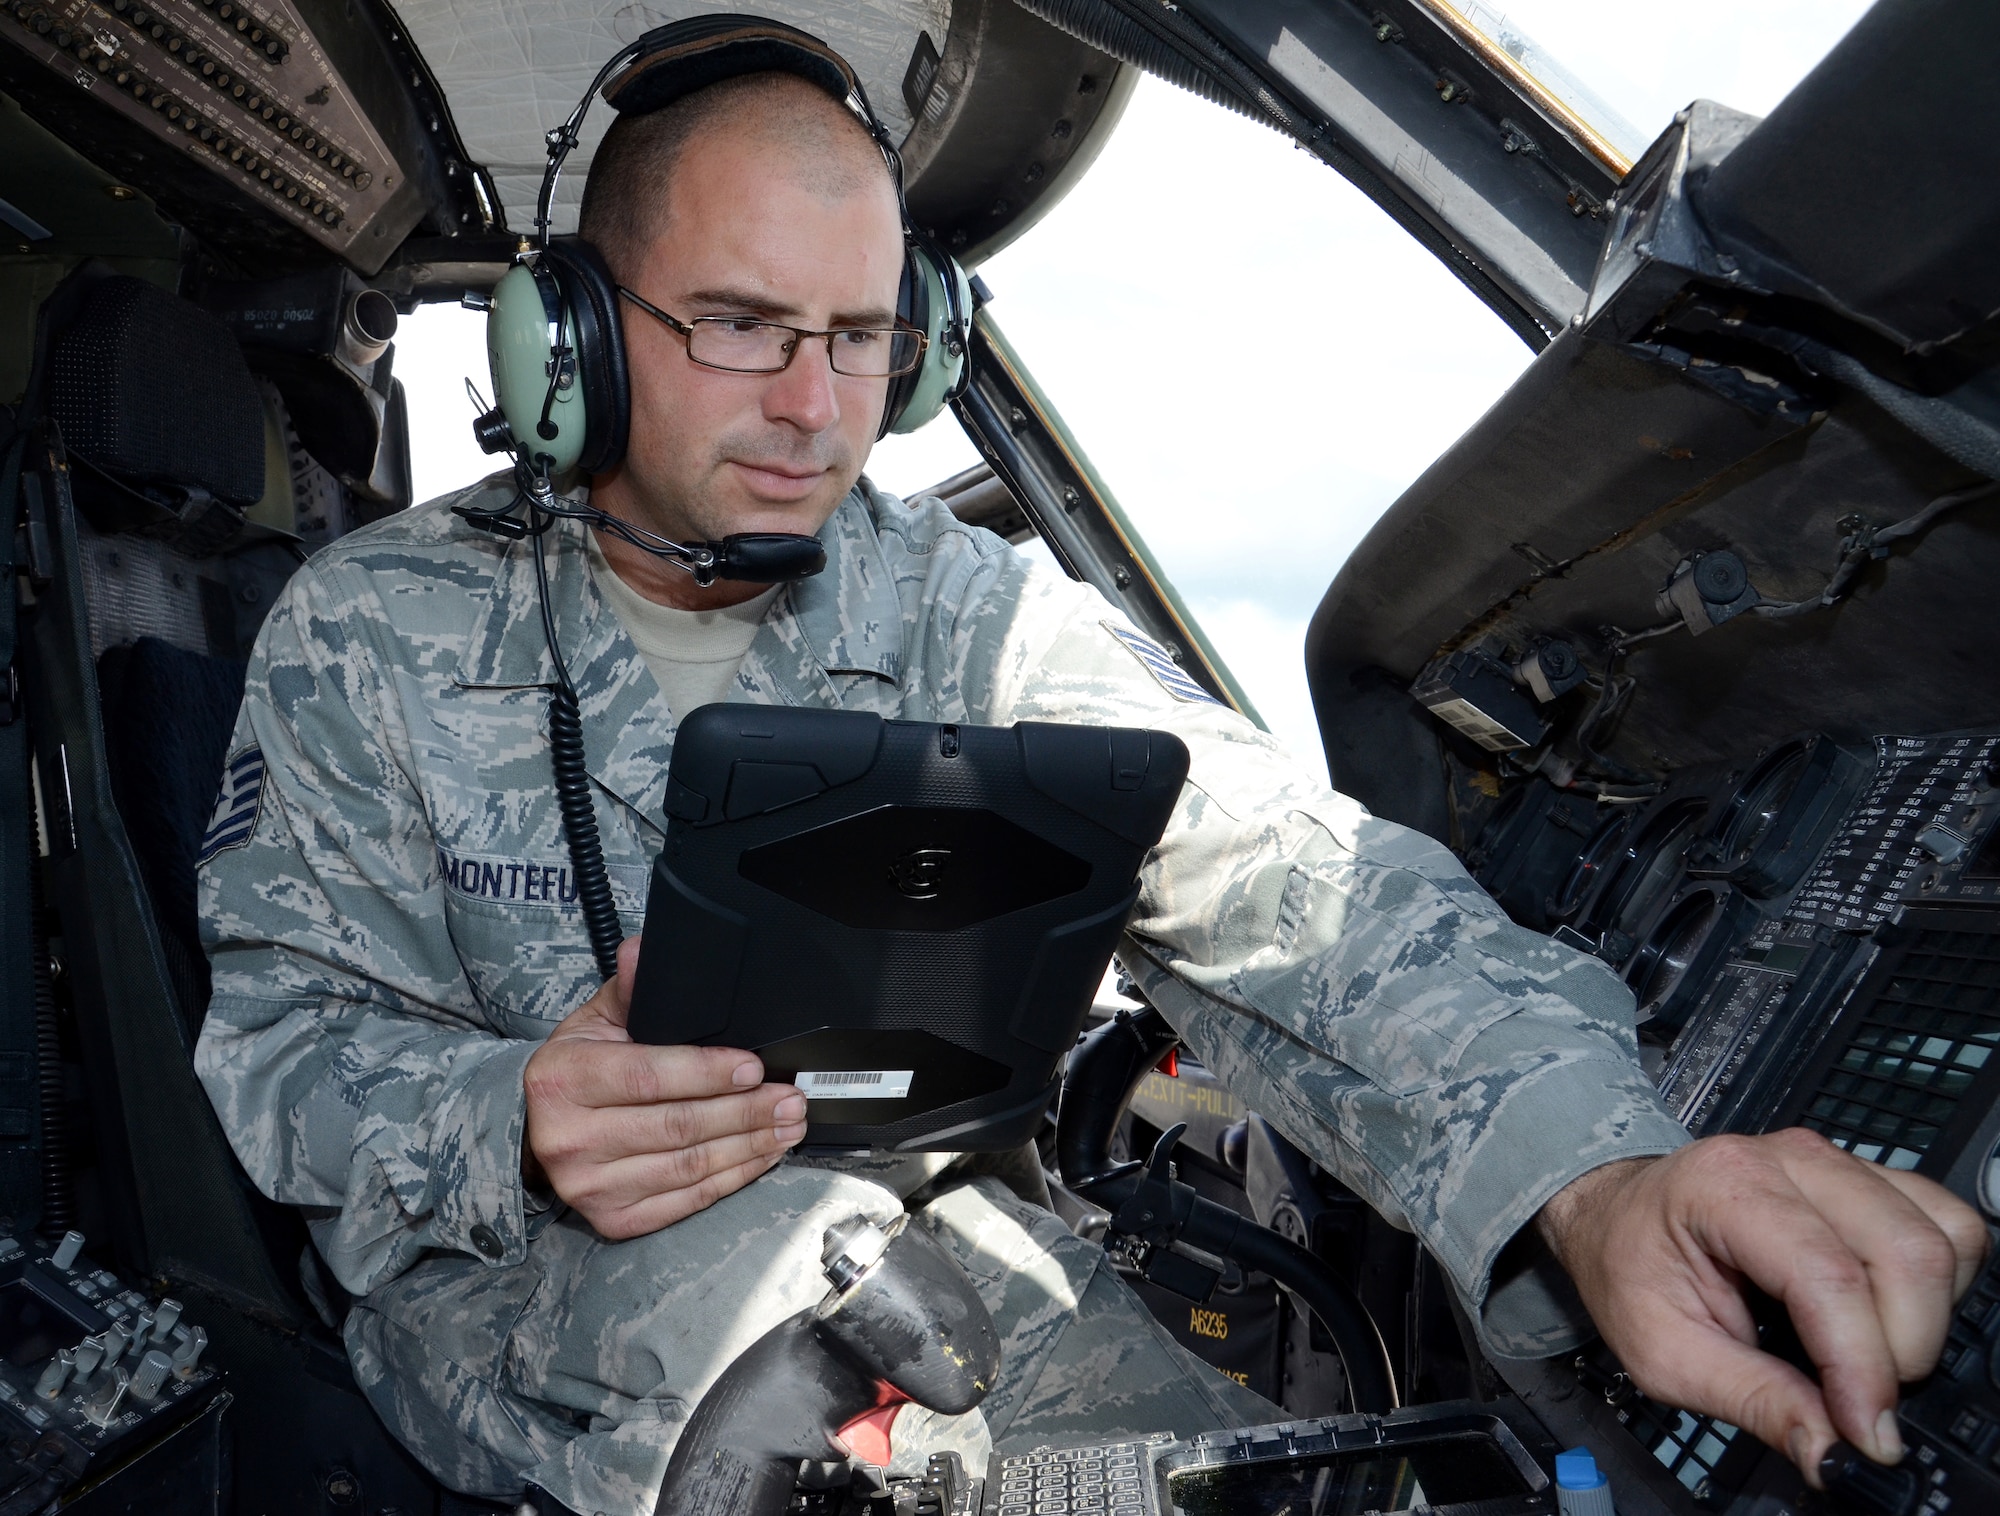 Tech. Sgt. Darren Montefu, 920th Rescue Wing reserve aircraft maintenance engineer, performs a pre-flight inspection using a semi-rugged commercial mobile device as a technical data reader, part of Air Force Reserve Command's eTools Lite initiative.  These devices were used during the Wing's recently successful HQ ACC/IG Operational Readiness Inspection, which noted "...the unit's superb use of technical data."  Montefu was recognized as a Superior Performer and received the ACC/IG General's Coin. (U.S. Air Force photo/2nd Lt. Leslie Forshaw)